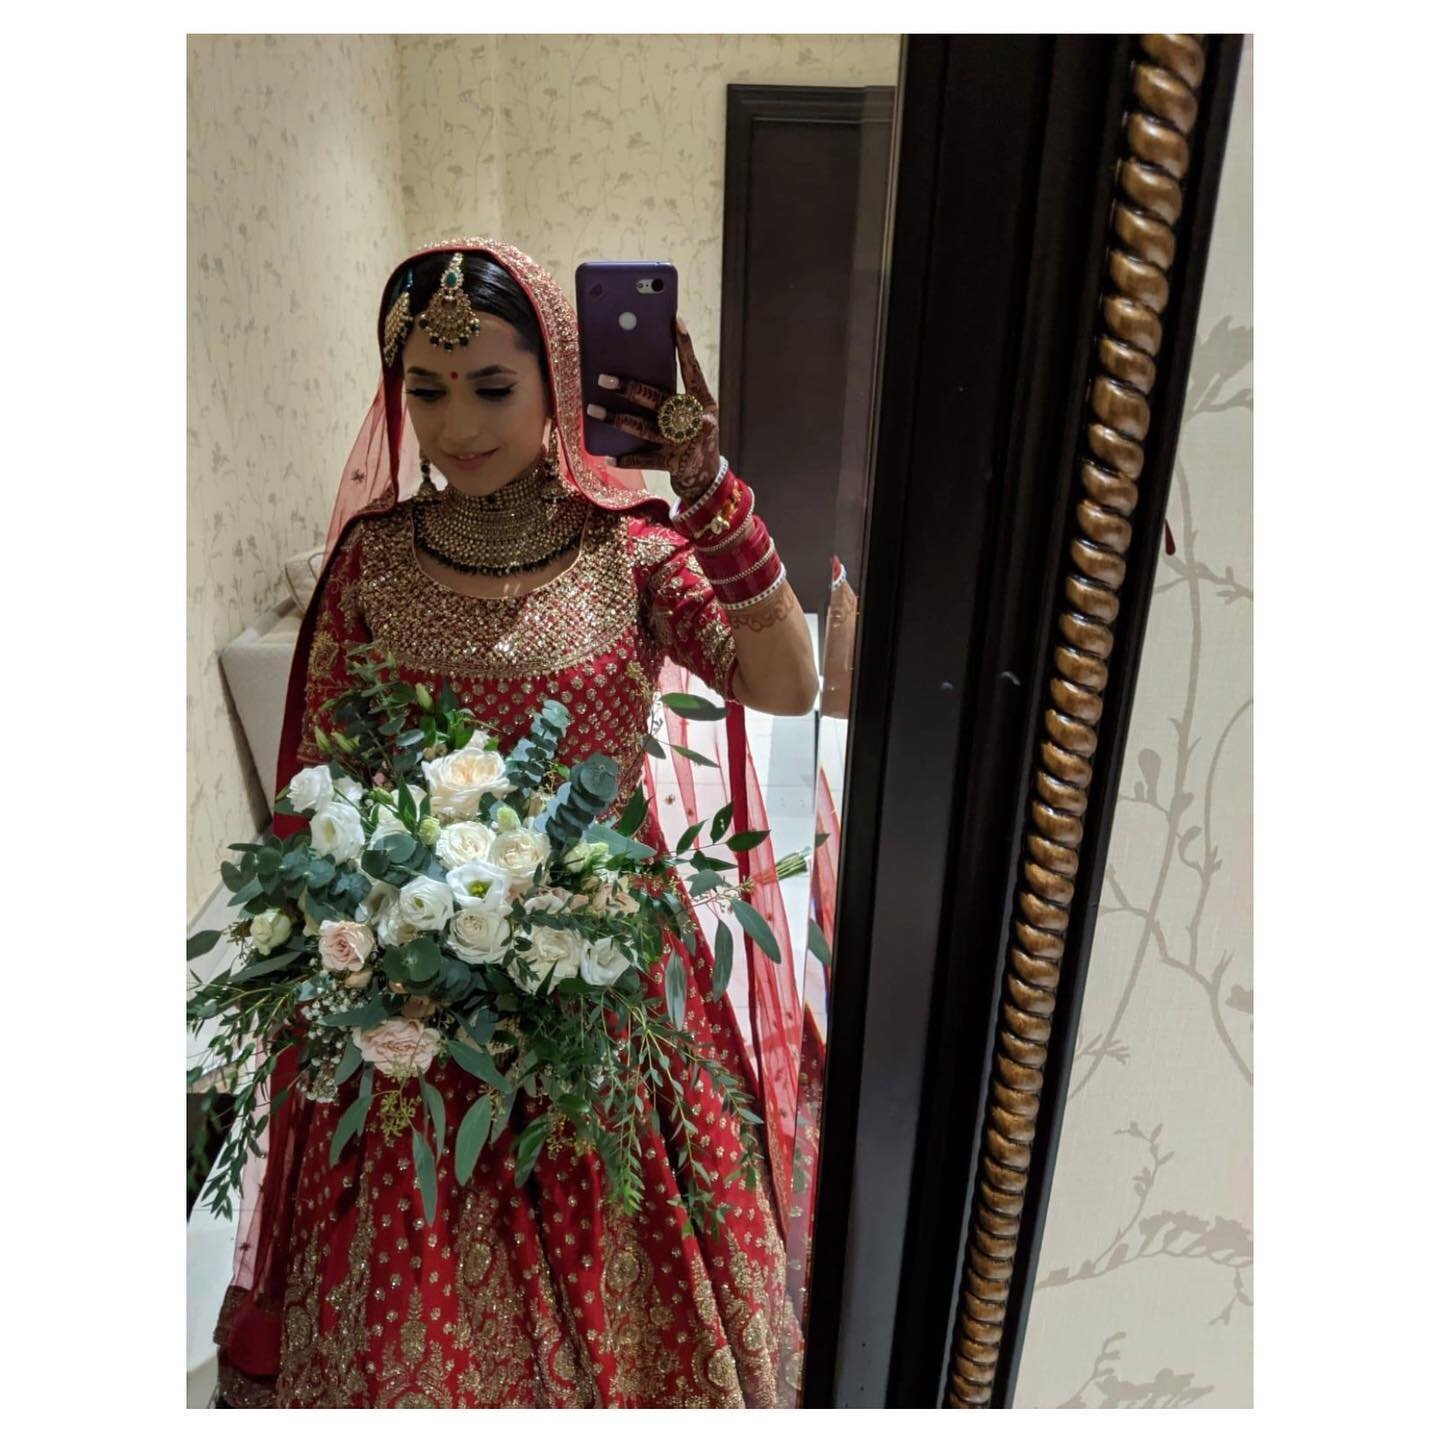 Our favourite Bridal Selfie ~ featuring our beautiful Bride Vishu and her stunning Garden Style Bouquet &hearts;️
.
S h o p 🌹 O n l i n e . at www.pinkpetals.ca
.
For all of your wedding or event floral needs, please contact Pink Petals at info@pink